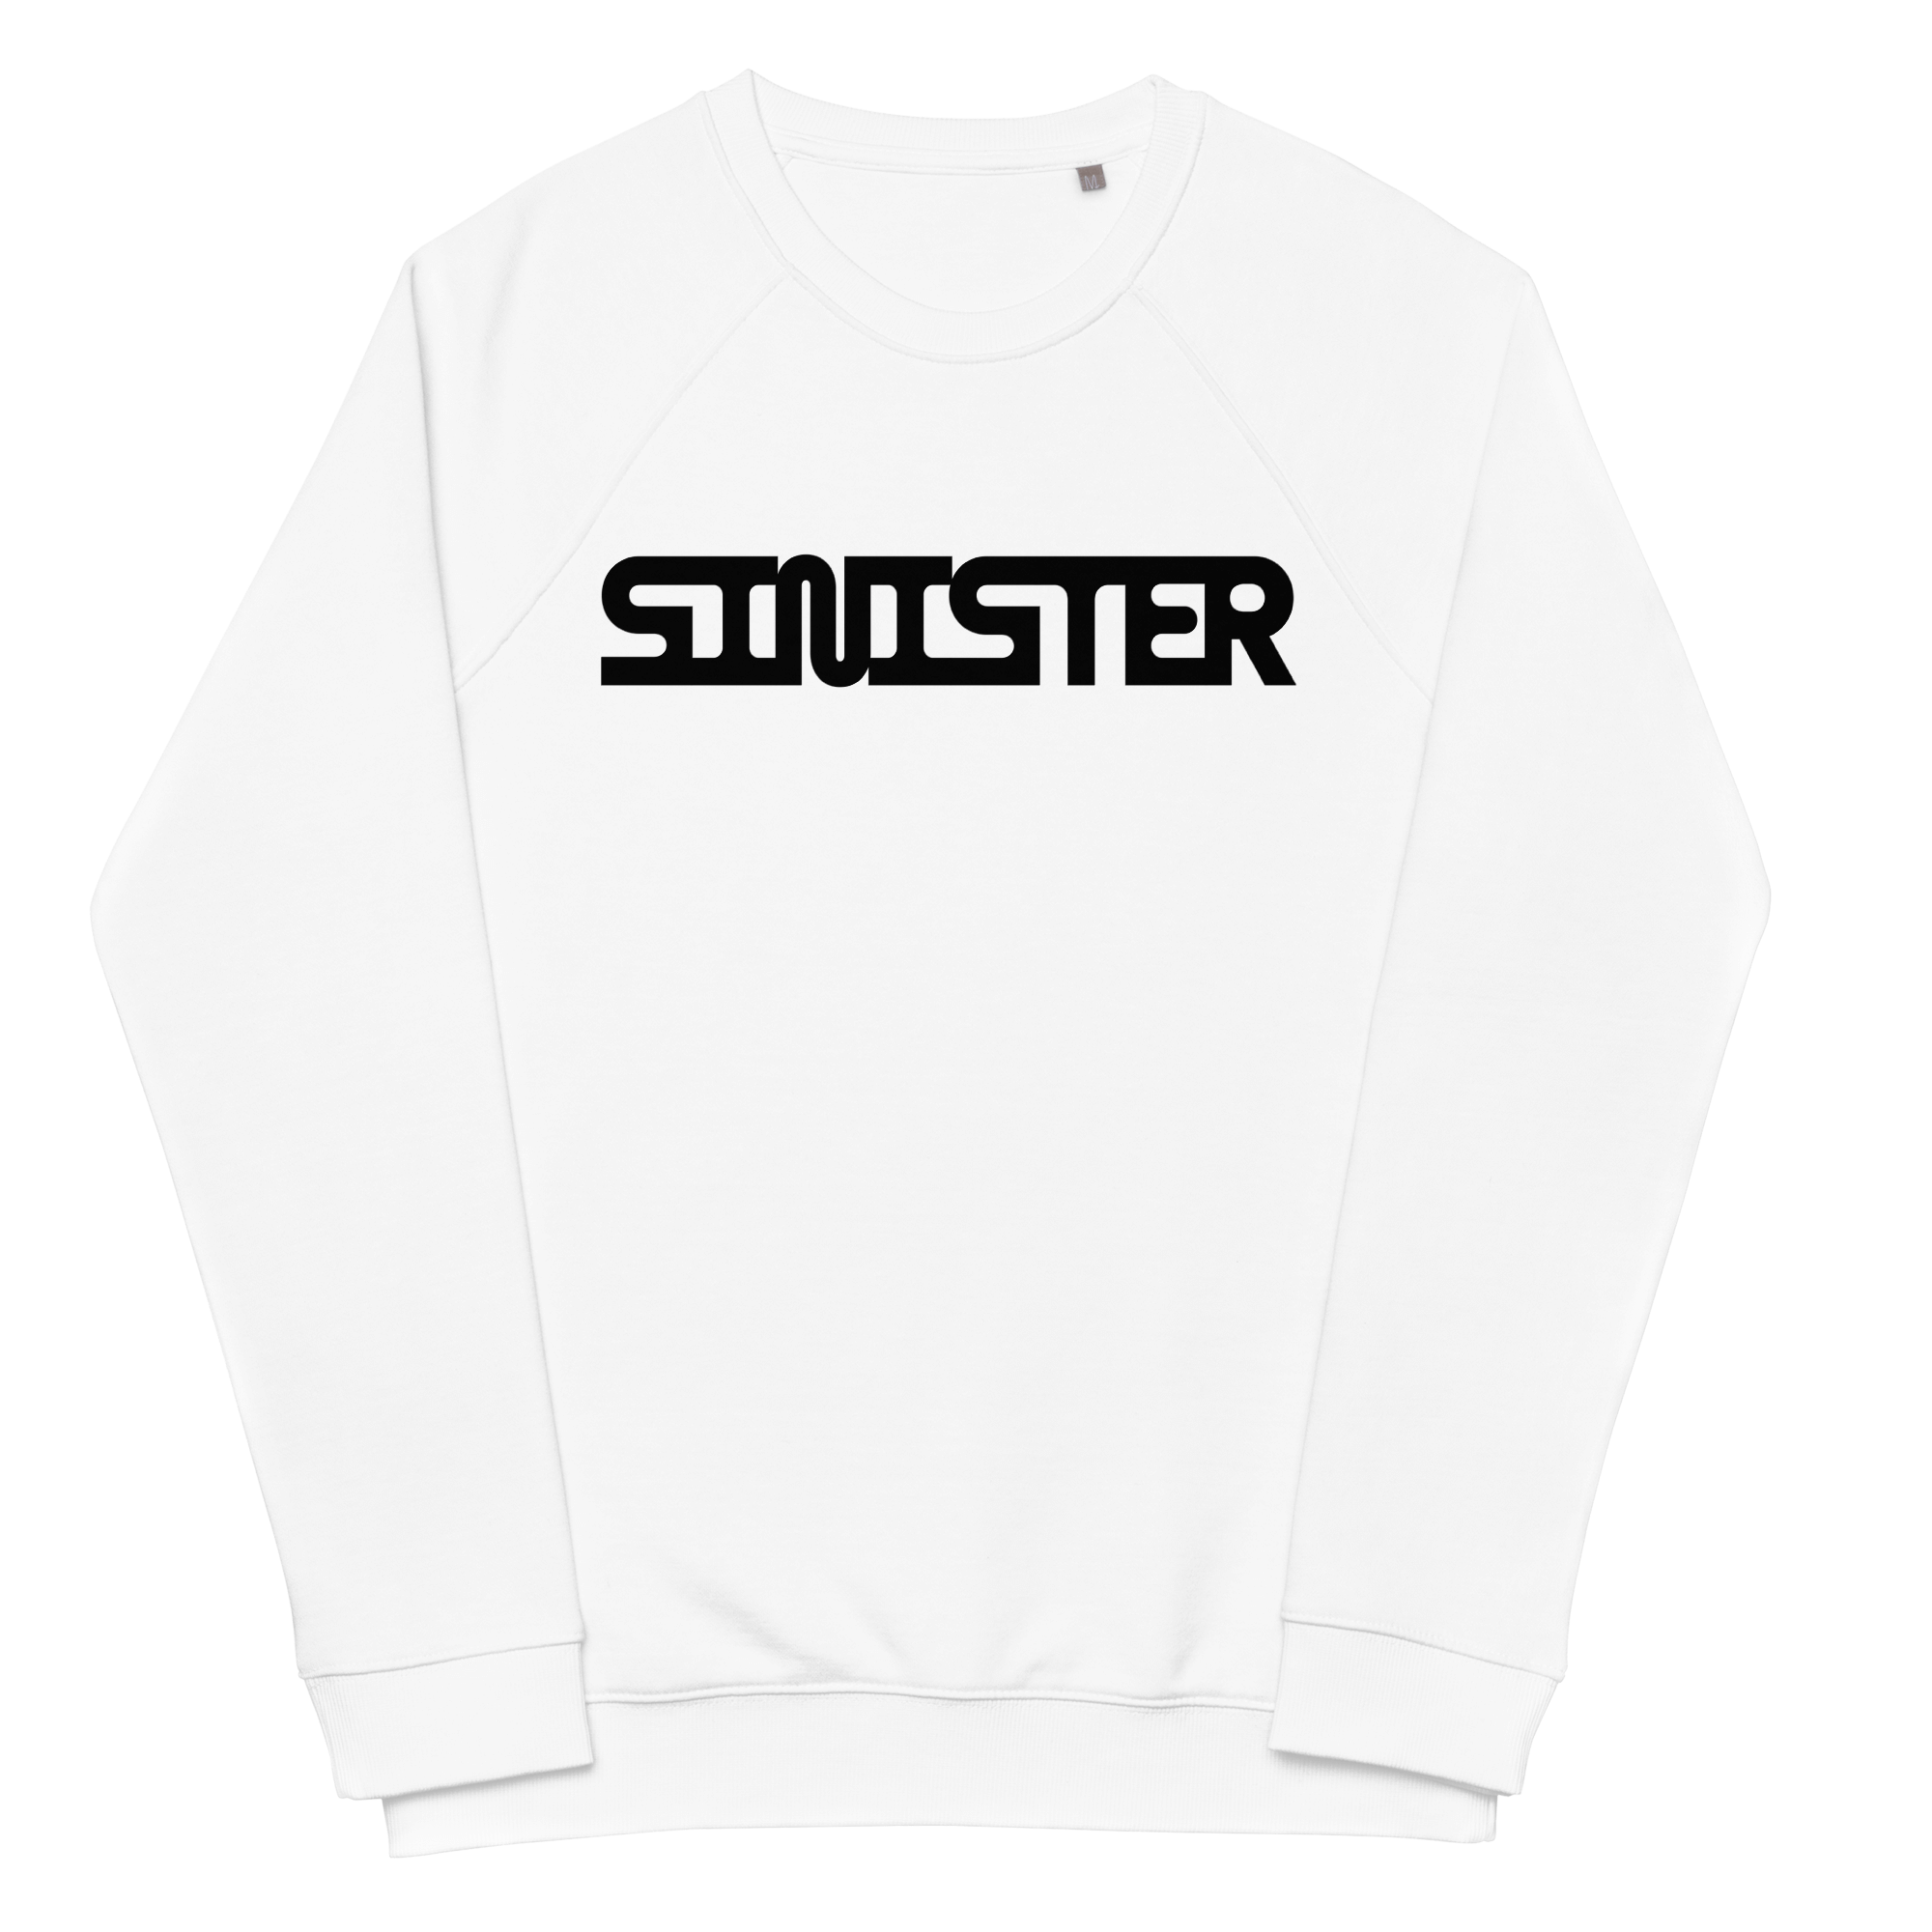 Sinister Raglan SweatshirtWrap yourself in style with the Sinister Raglan Sweatshirt. Achieve both comfort and fashion effortlessly with this unisex organic gem. The brushed fleece lining feels like a hug from a cloud of softness, and the 100% cotton exte